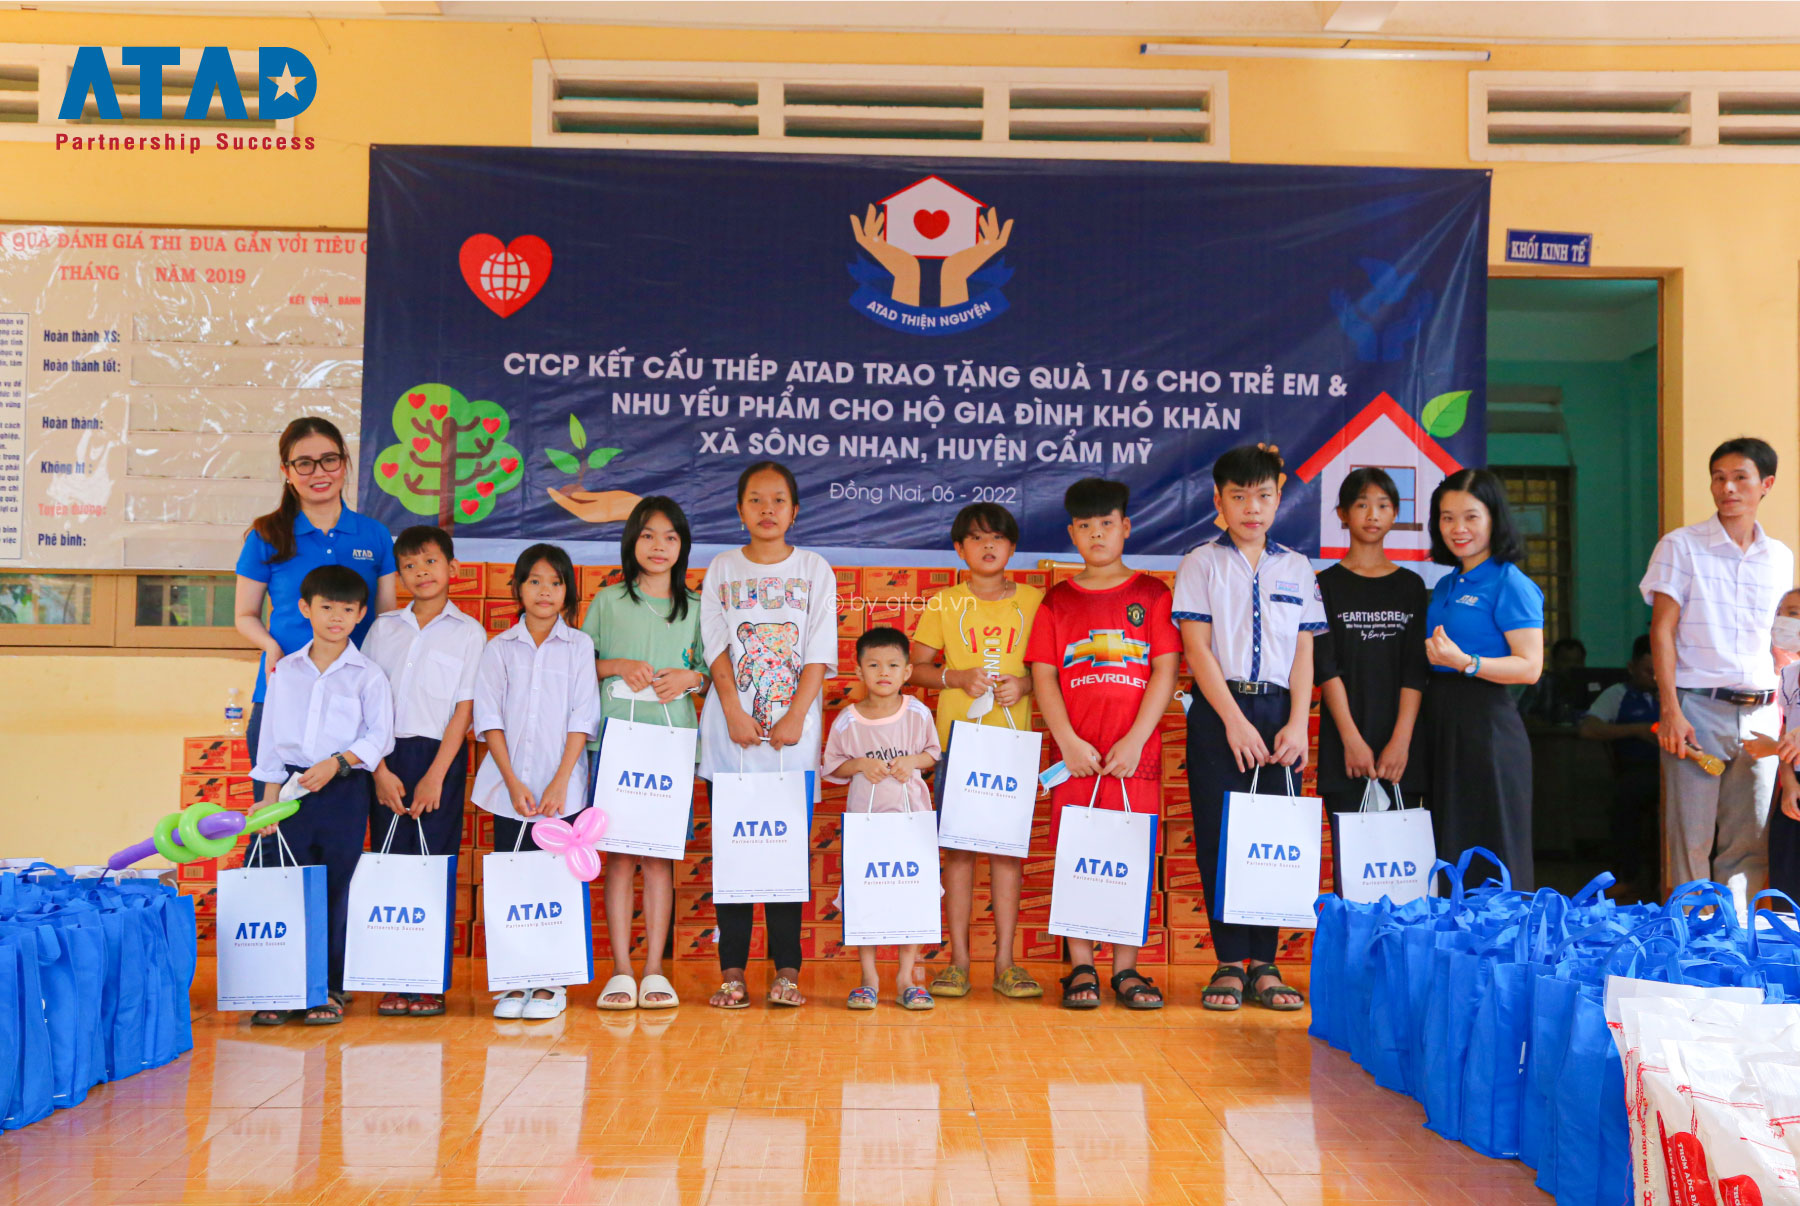 ATAD Presented Gifts For Children On International Children’s Day 1/6 & Necessities For Underprivileged Households Living In Song Nhan Village, Dong Nai Province 5